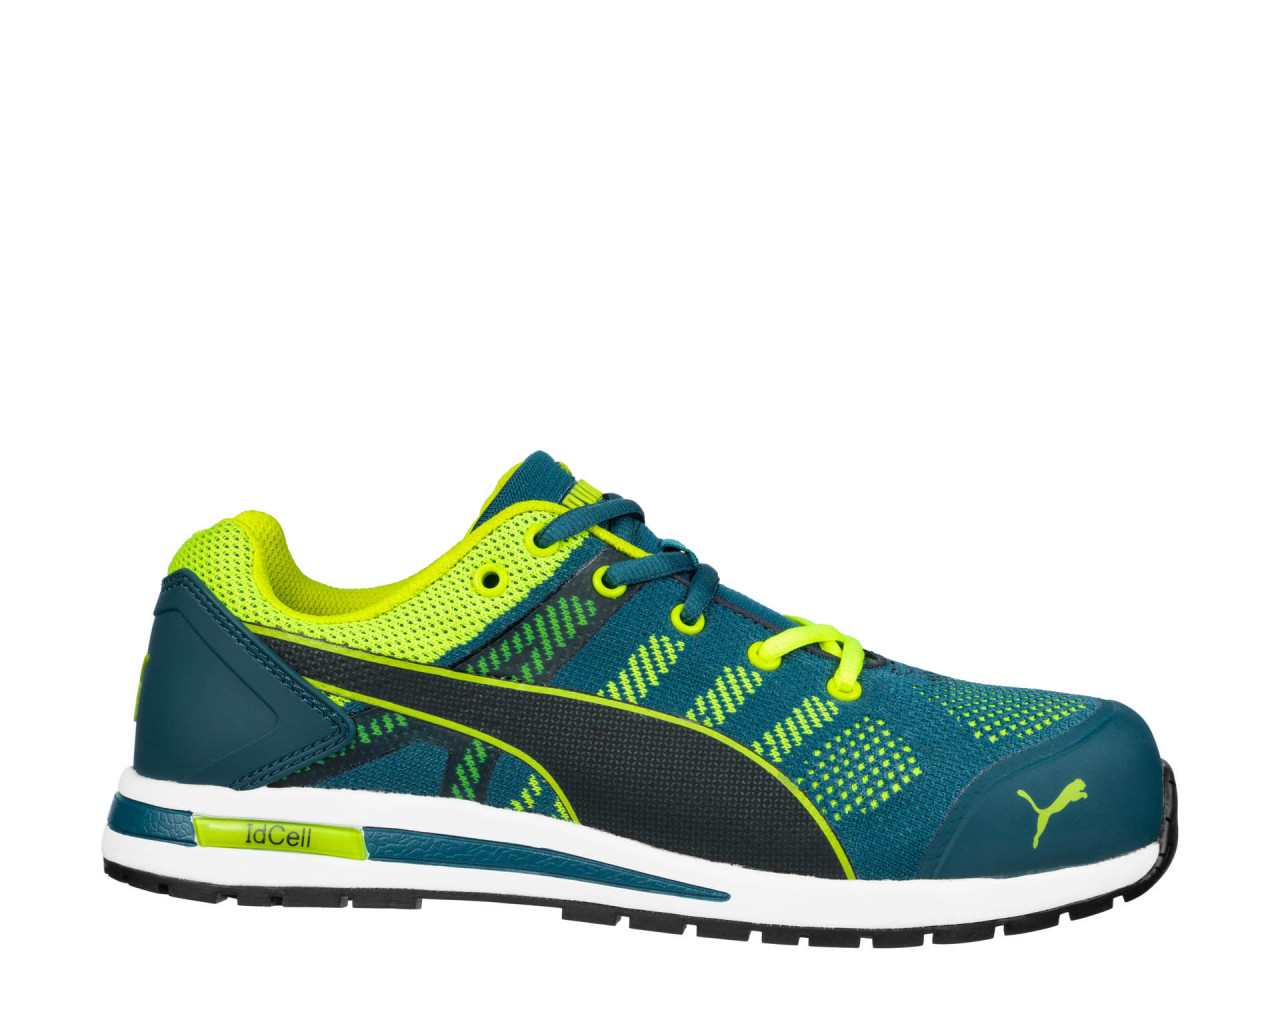 PUMA SAFETY ELEVATE KNIT GREEN LOW S1P ESD HRO SRC